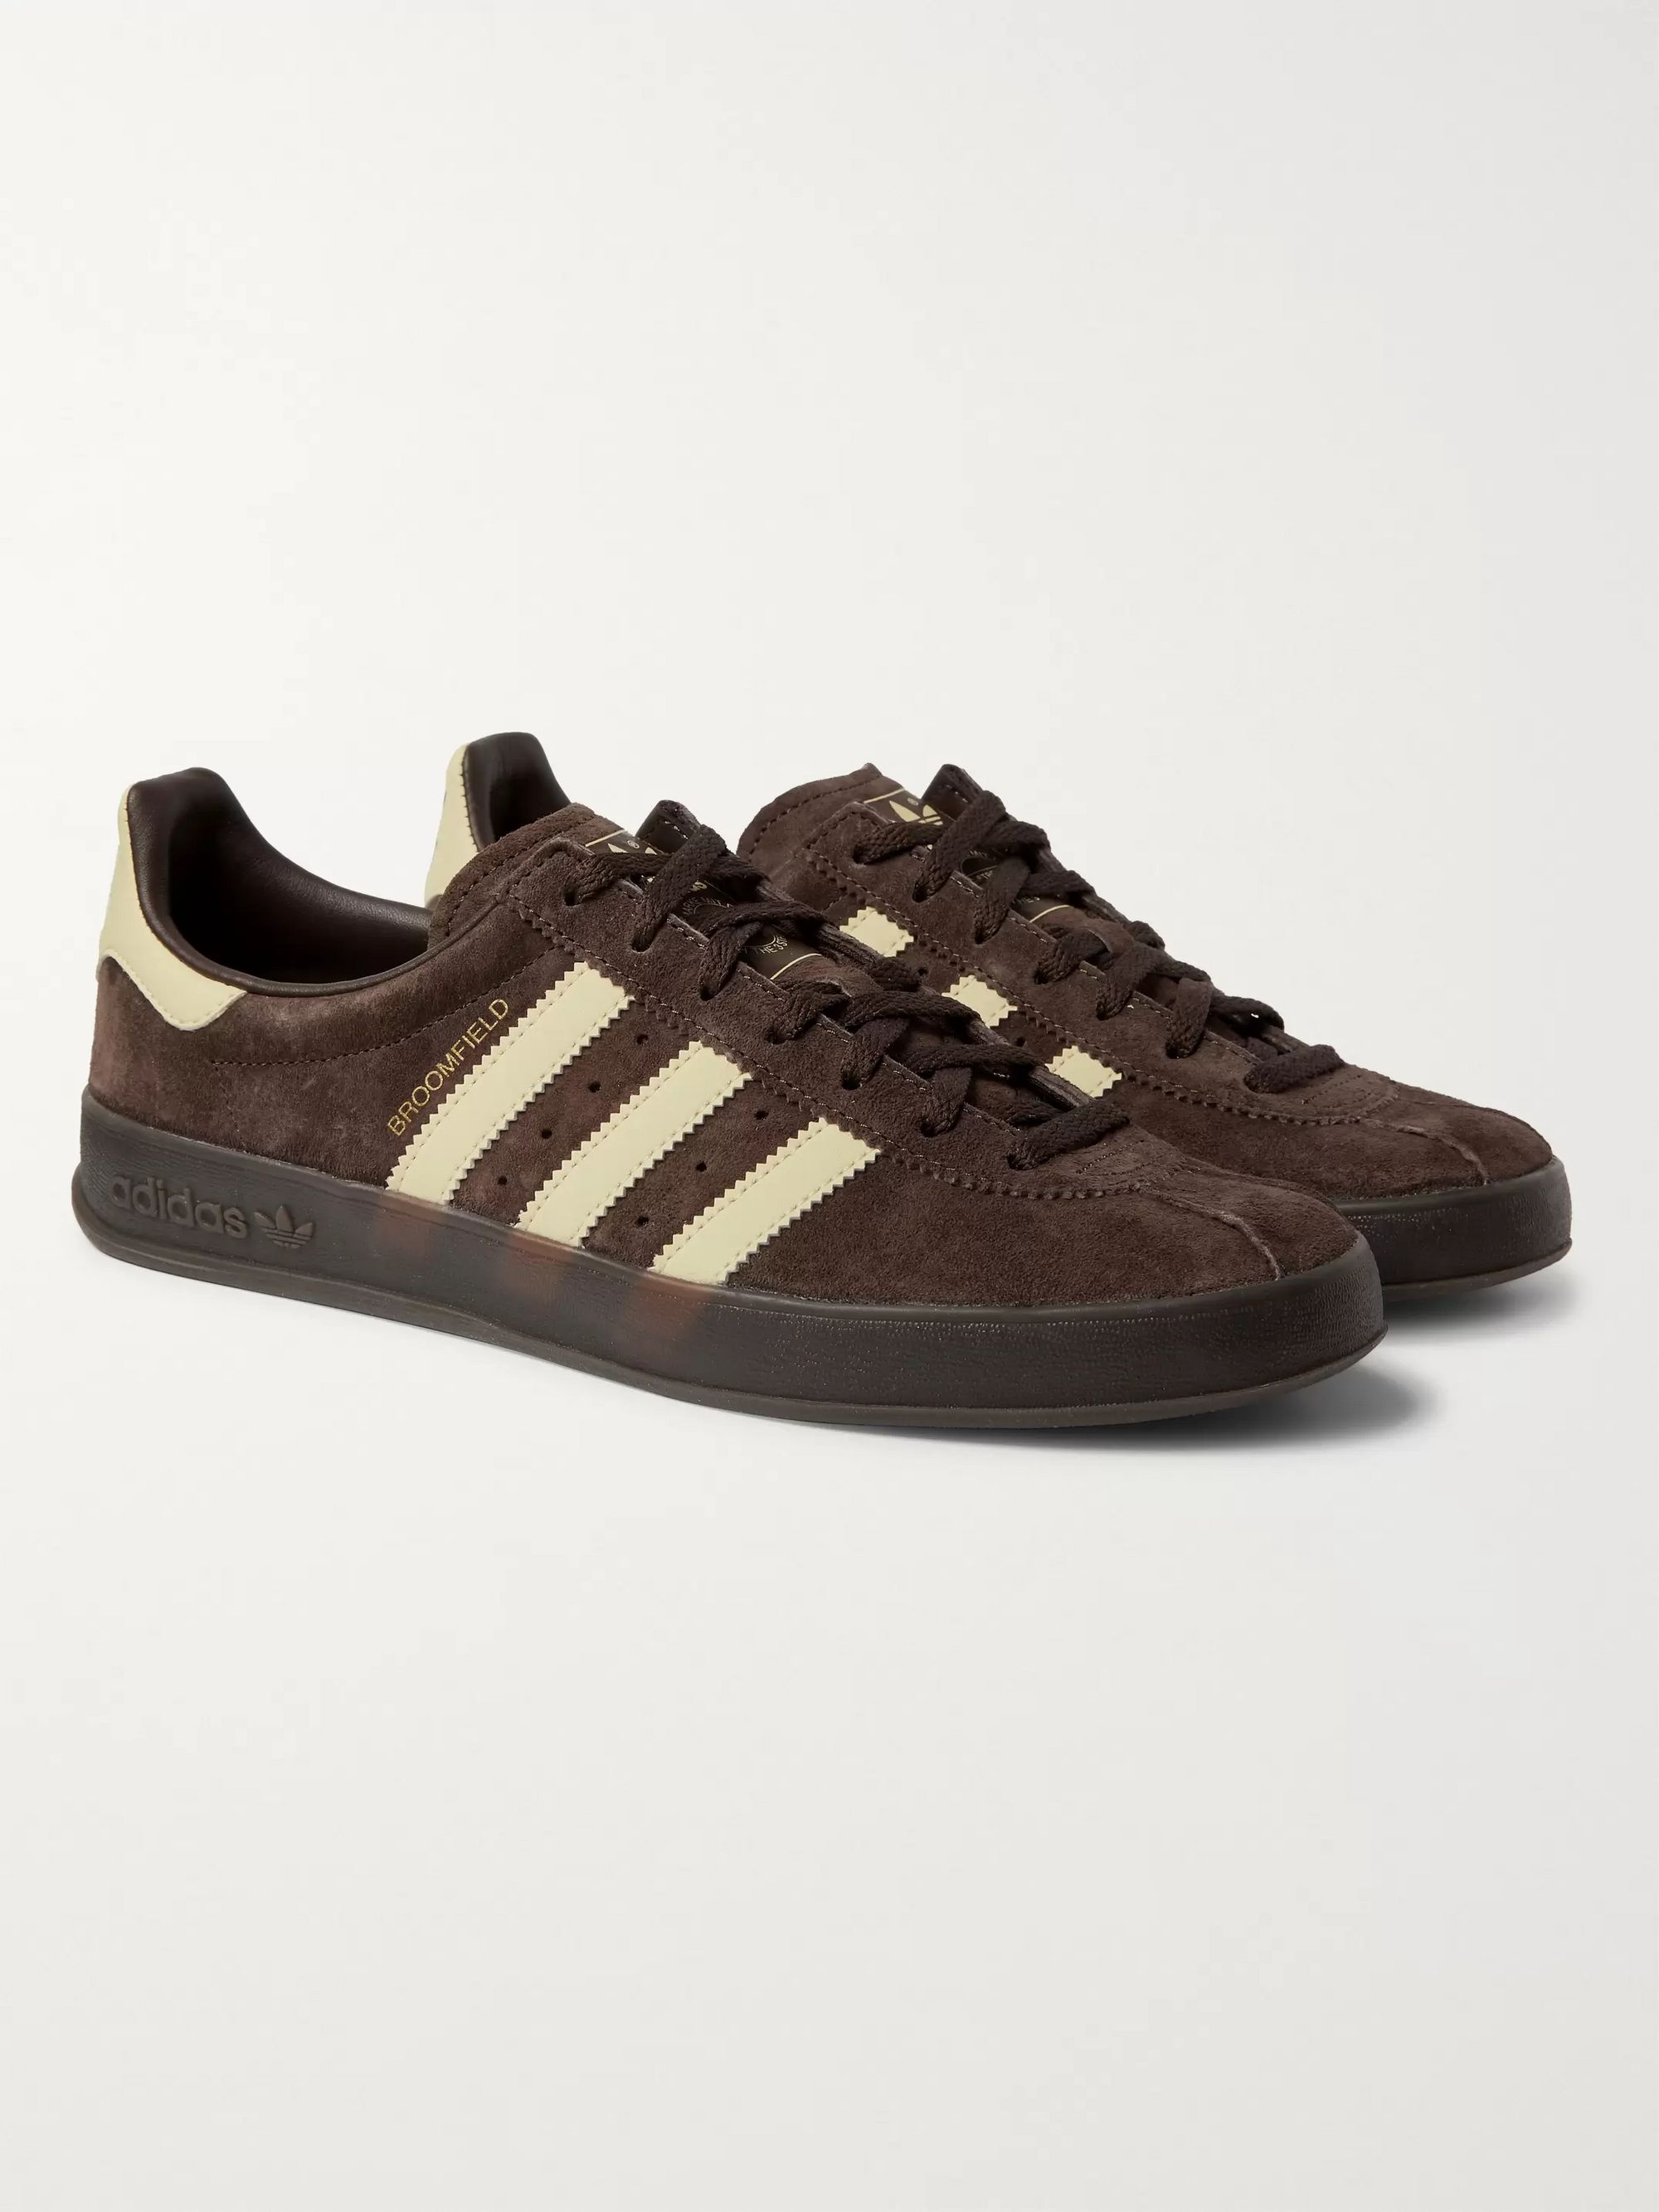 adidas brown suede shoes